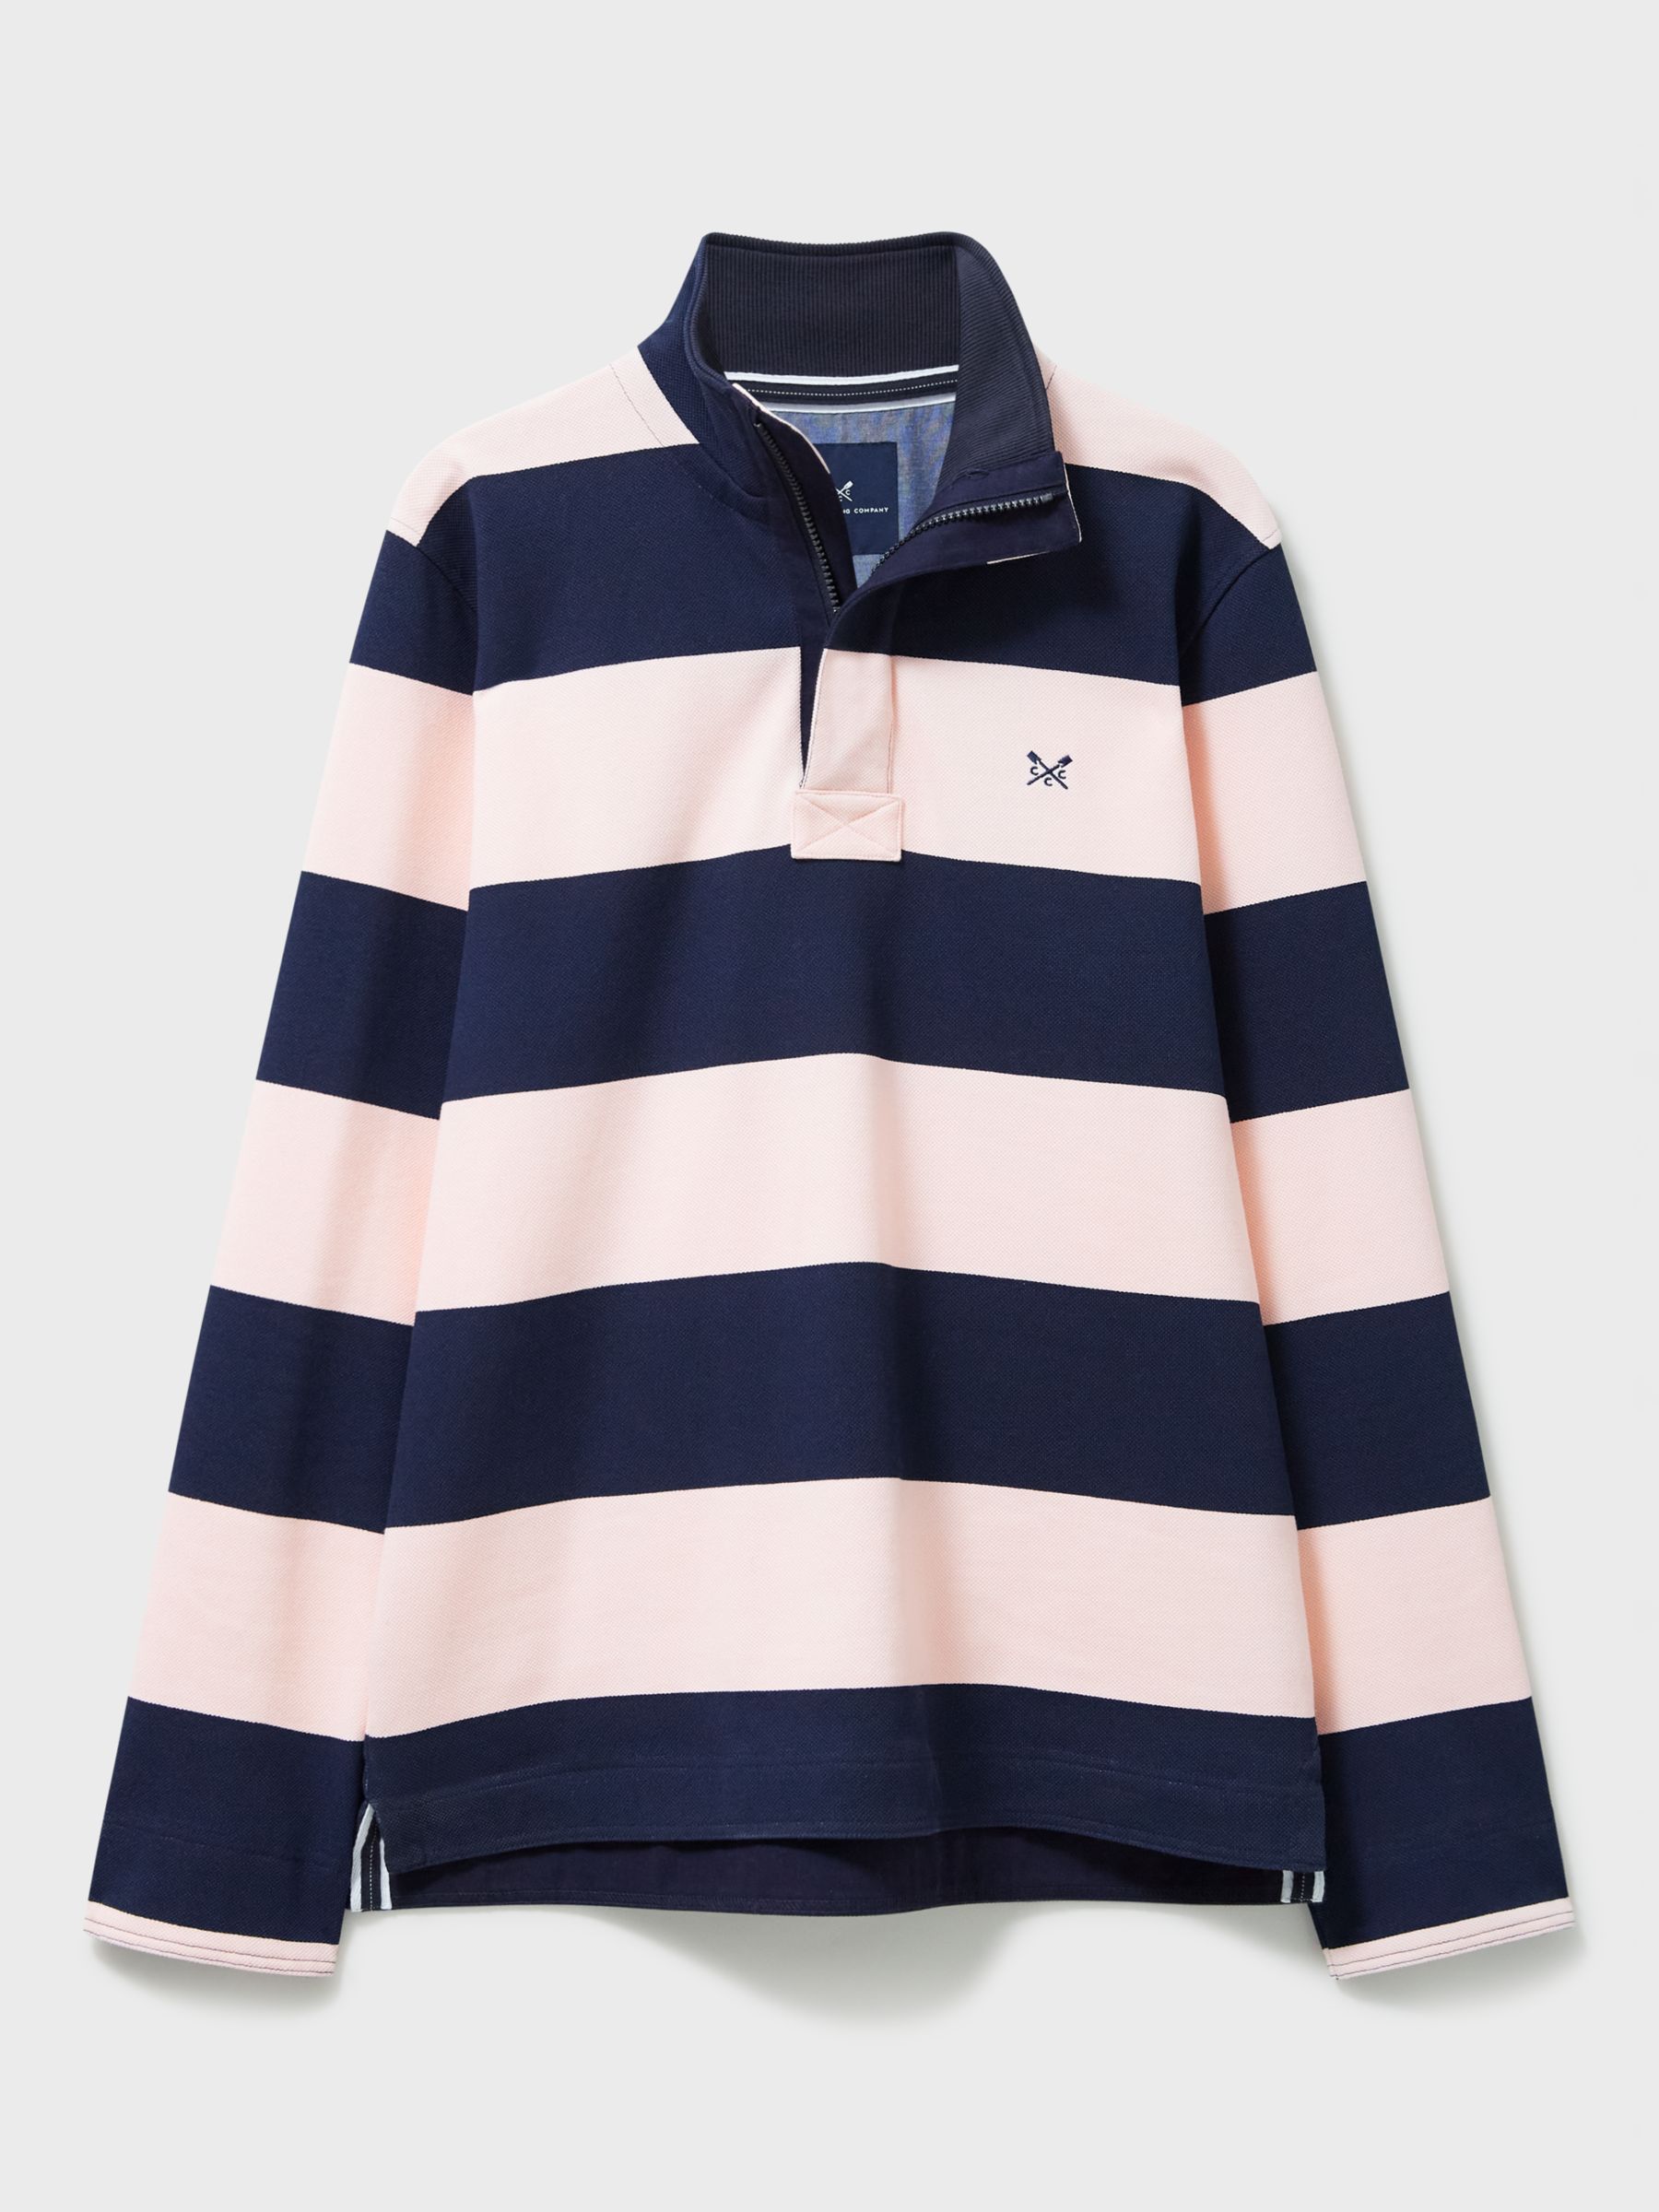 Crew Clothing Padstow Pique Stripe Jumper, Pink/Navy, L